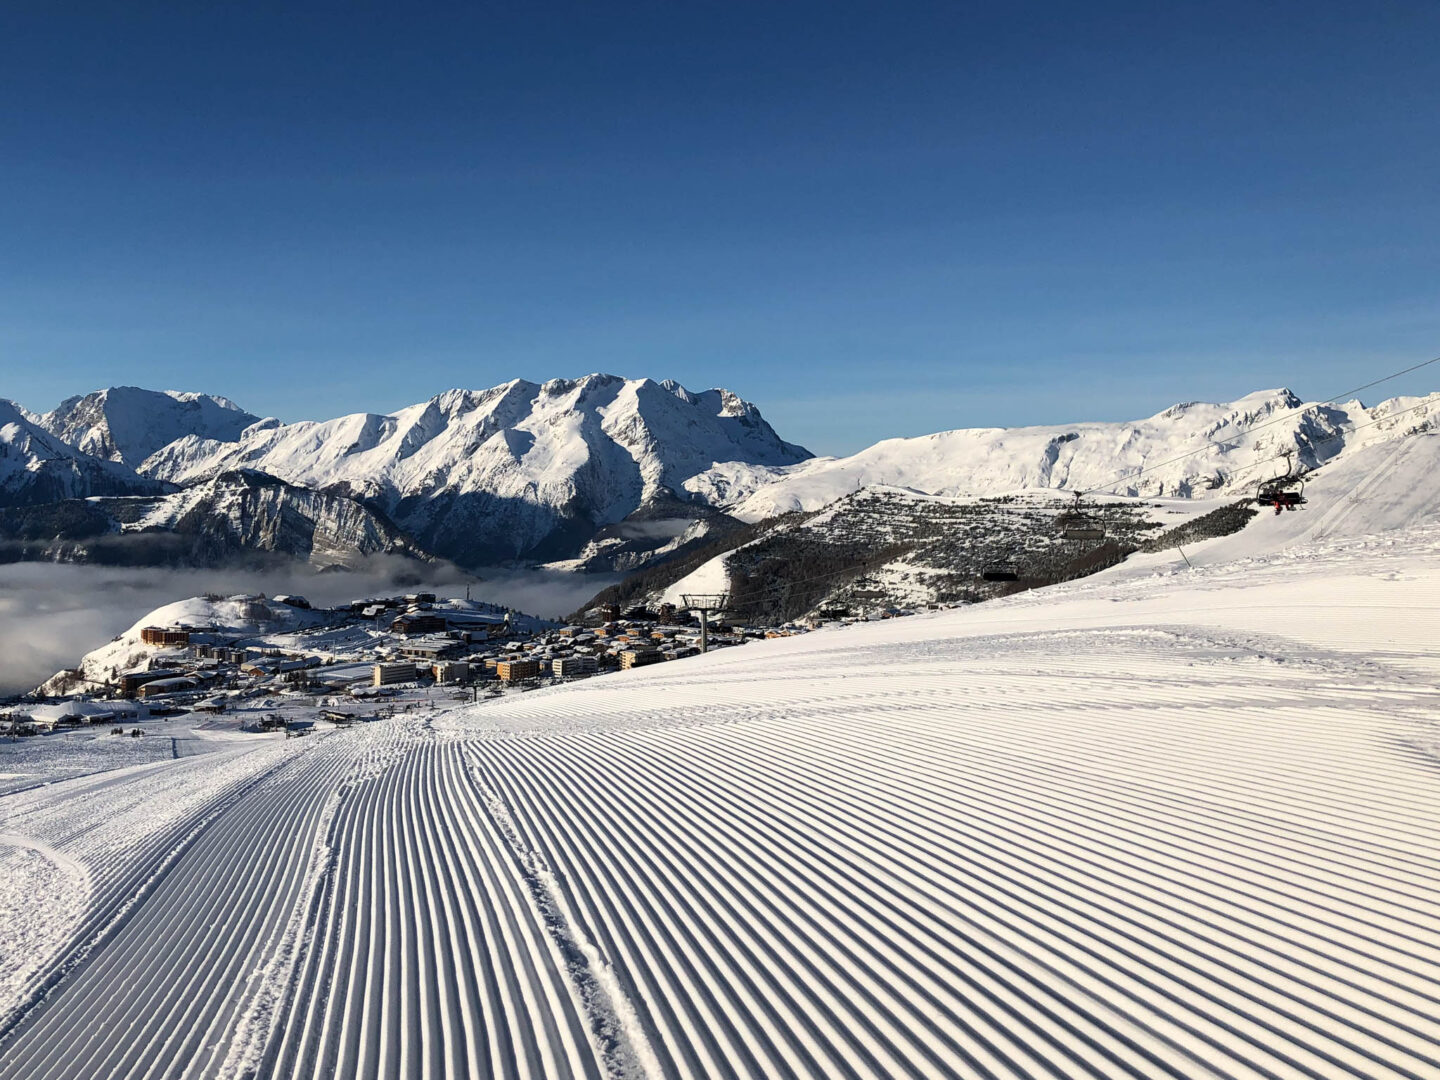 An expert guide to ski holidays in Alpe d'Huez, France